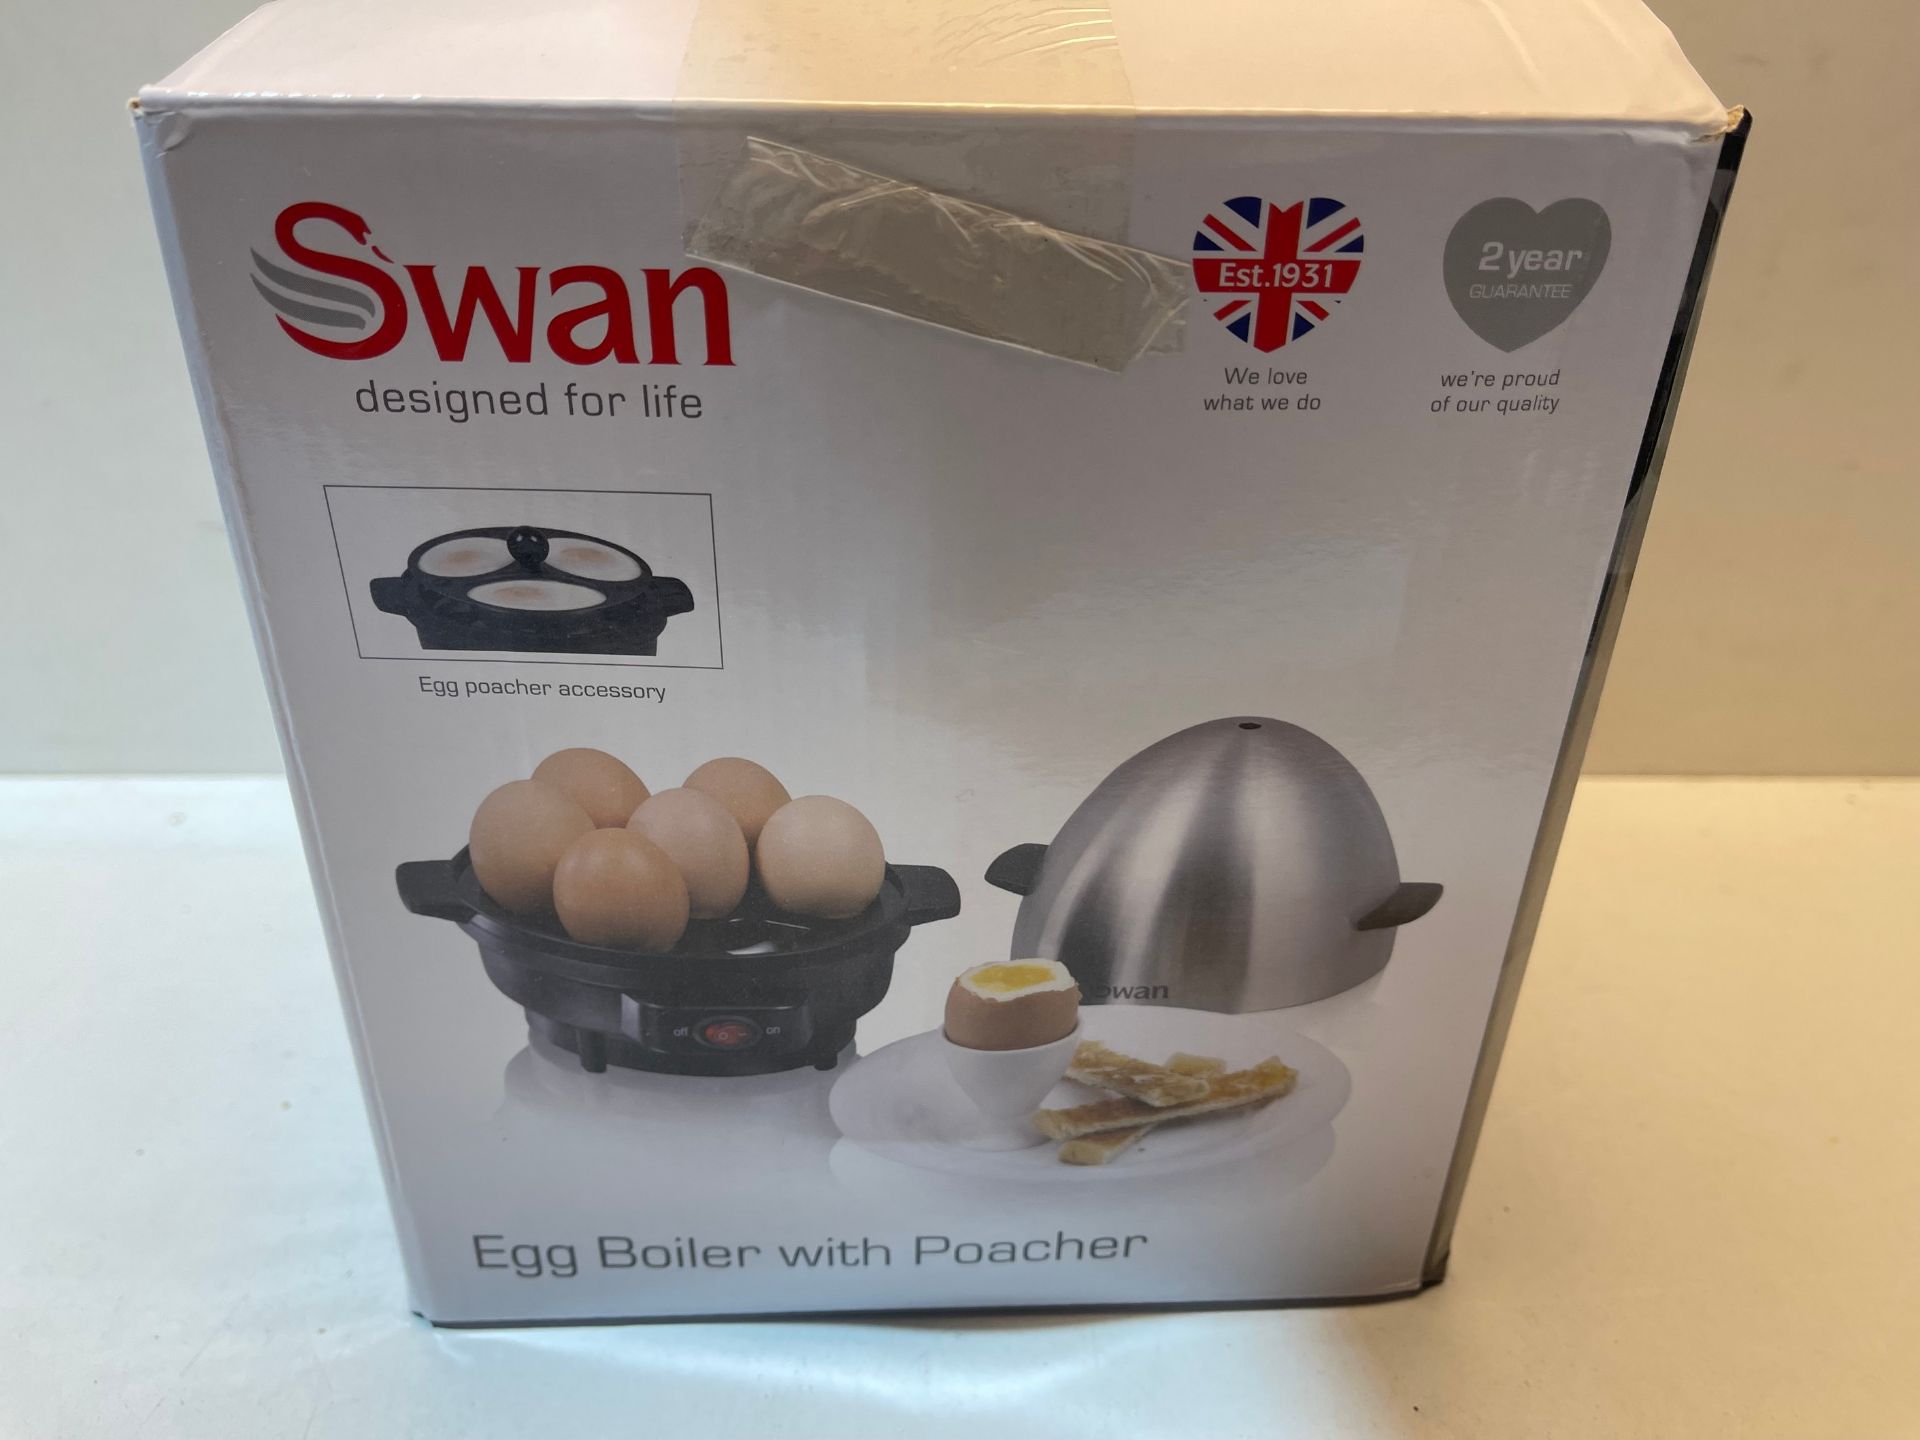 Swan SF21020N 7 Egg Boiler and Poacher, Featuring 3 Cook Settings, 350w, Black/Stainless Steel Â£